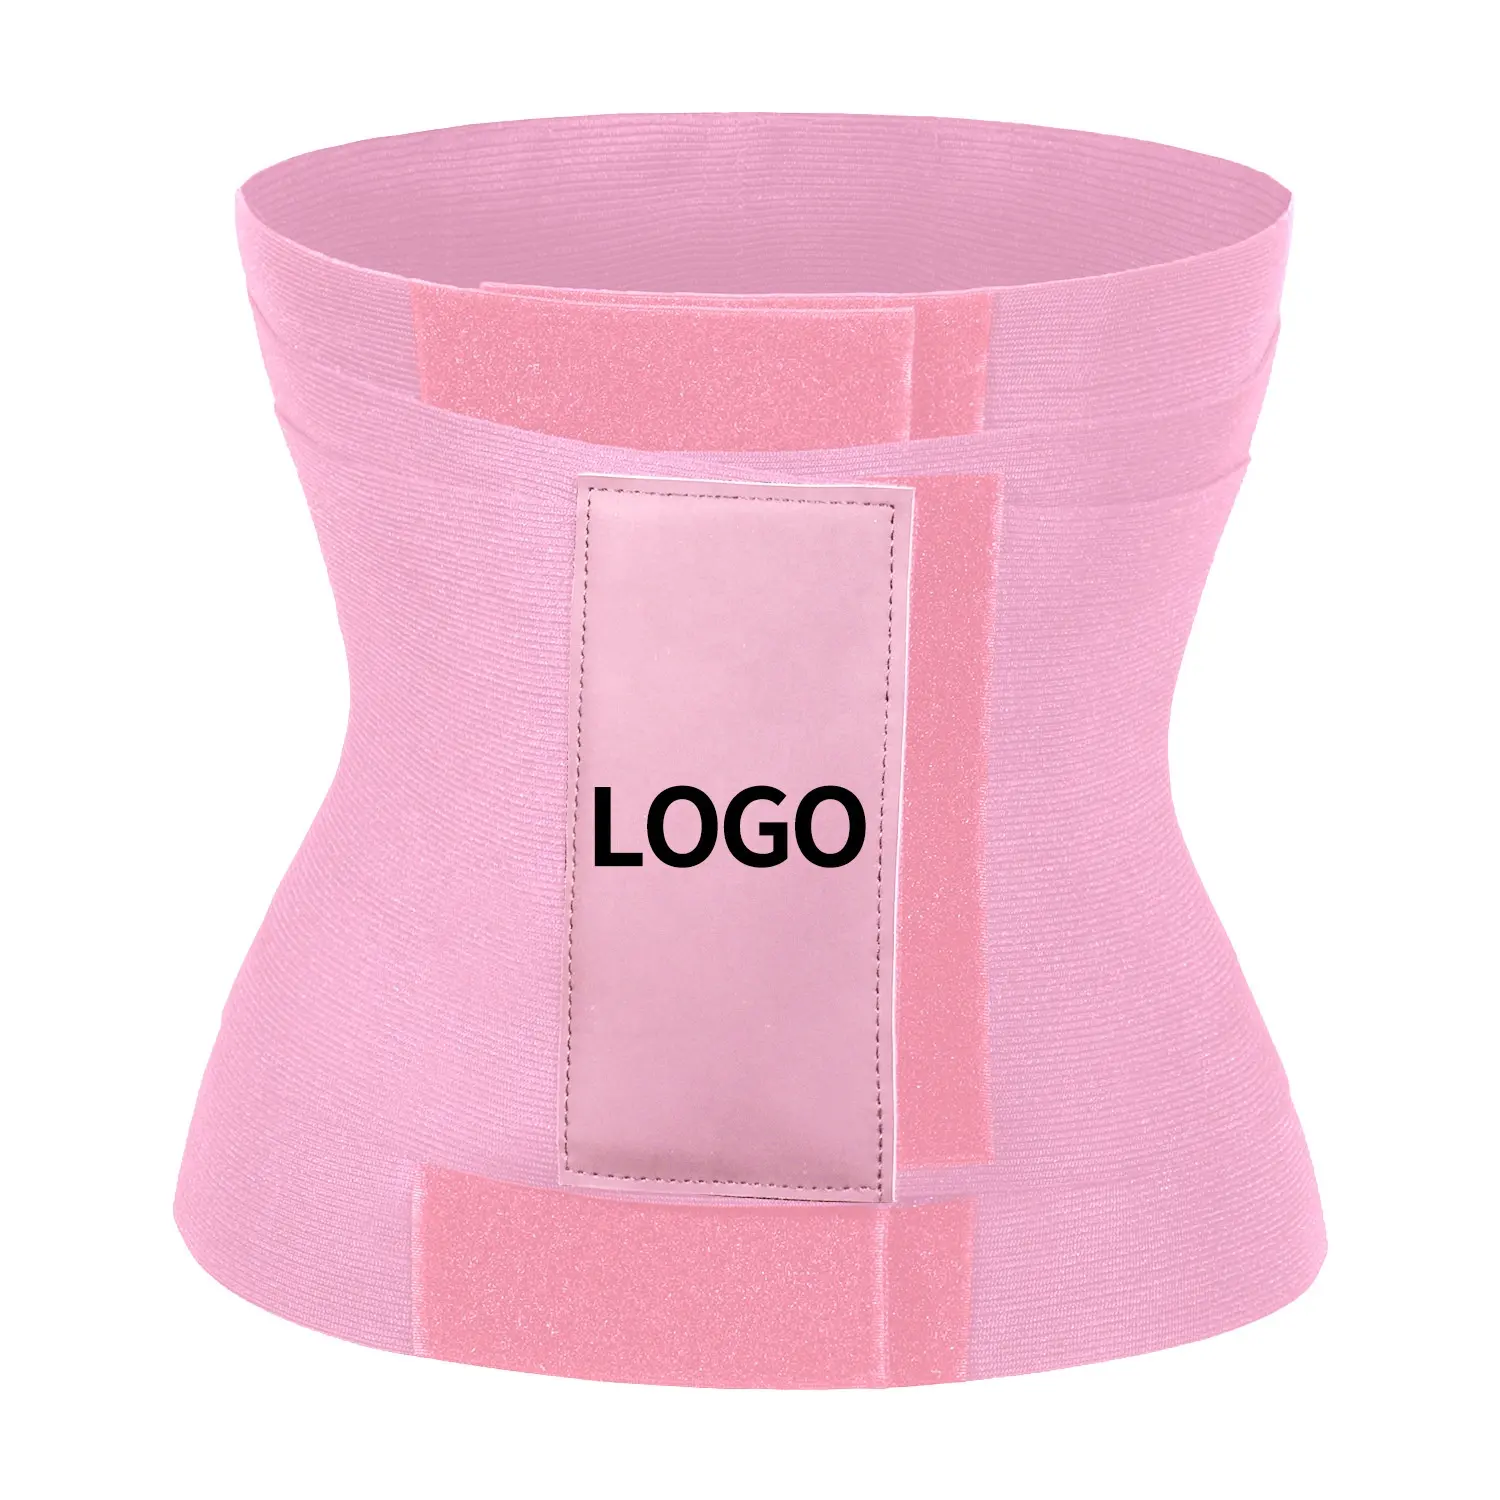 3028 Wholesale Lumbar Support Sweat Trimmer Belt Private Label Bandage Wrap Pink Waist Trainer